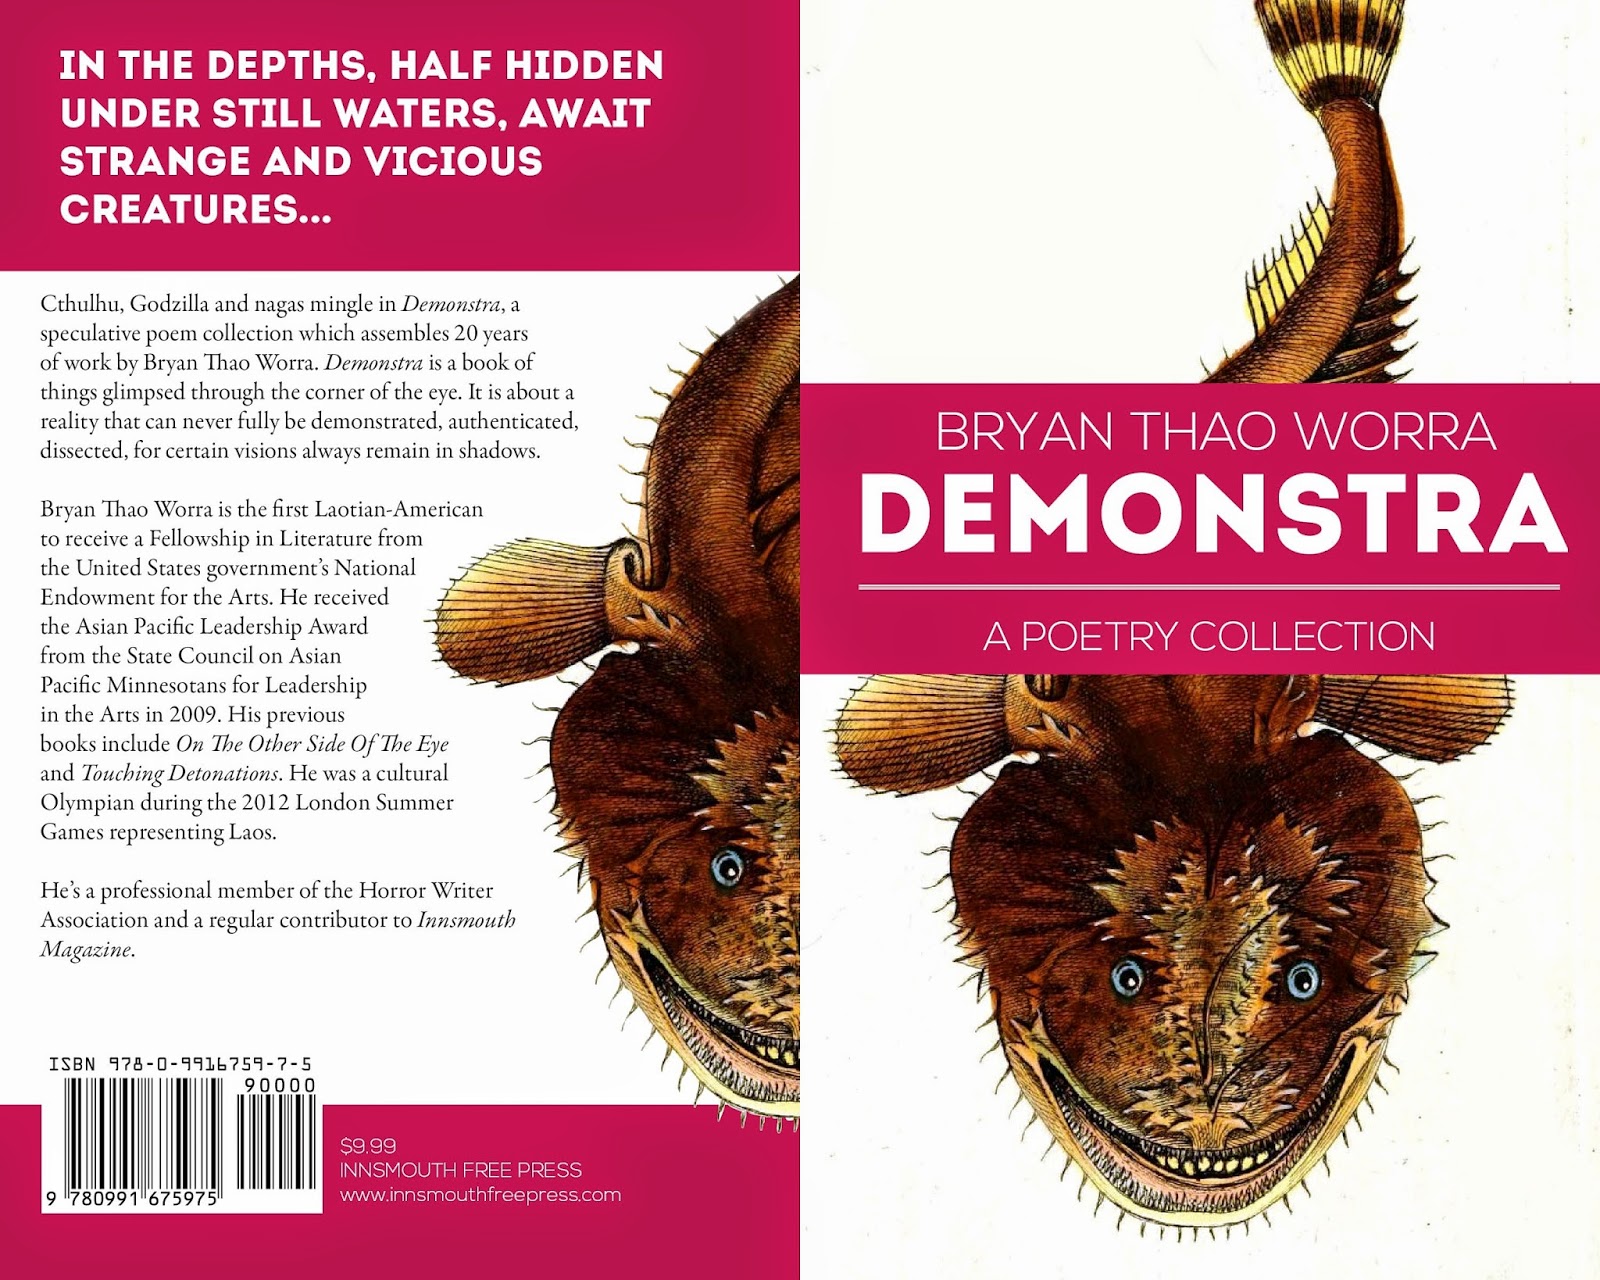 Lao poetry book - Demonstra by Bryan Thao Worra.  Illustrated by Vonguane Manivong.